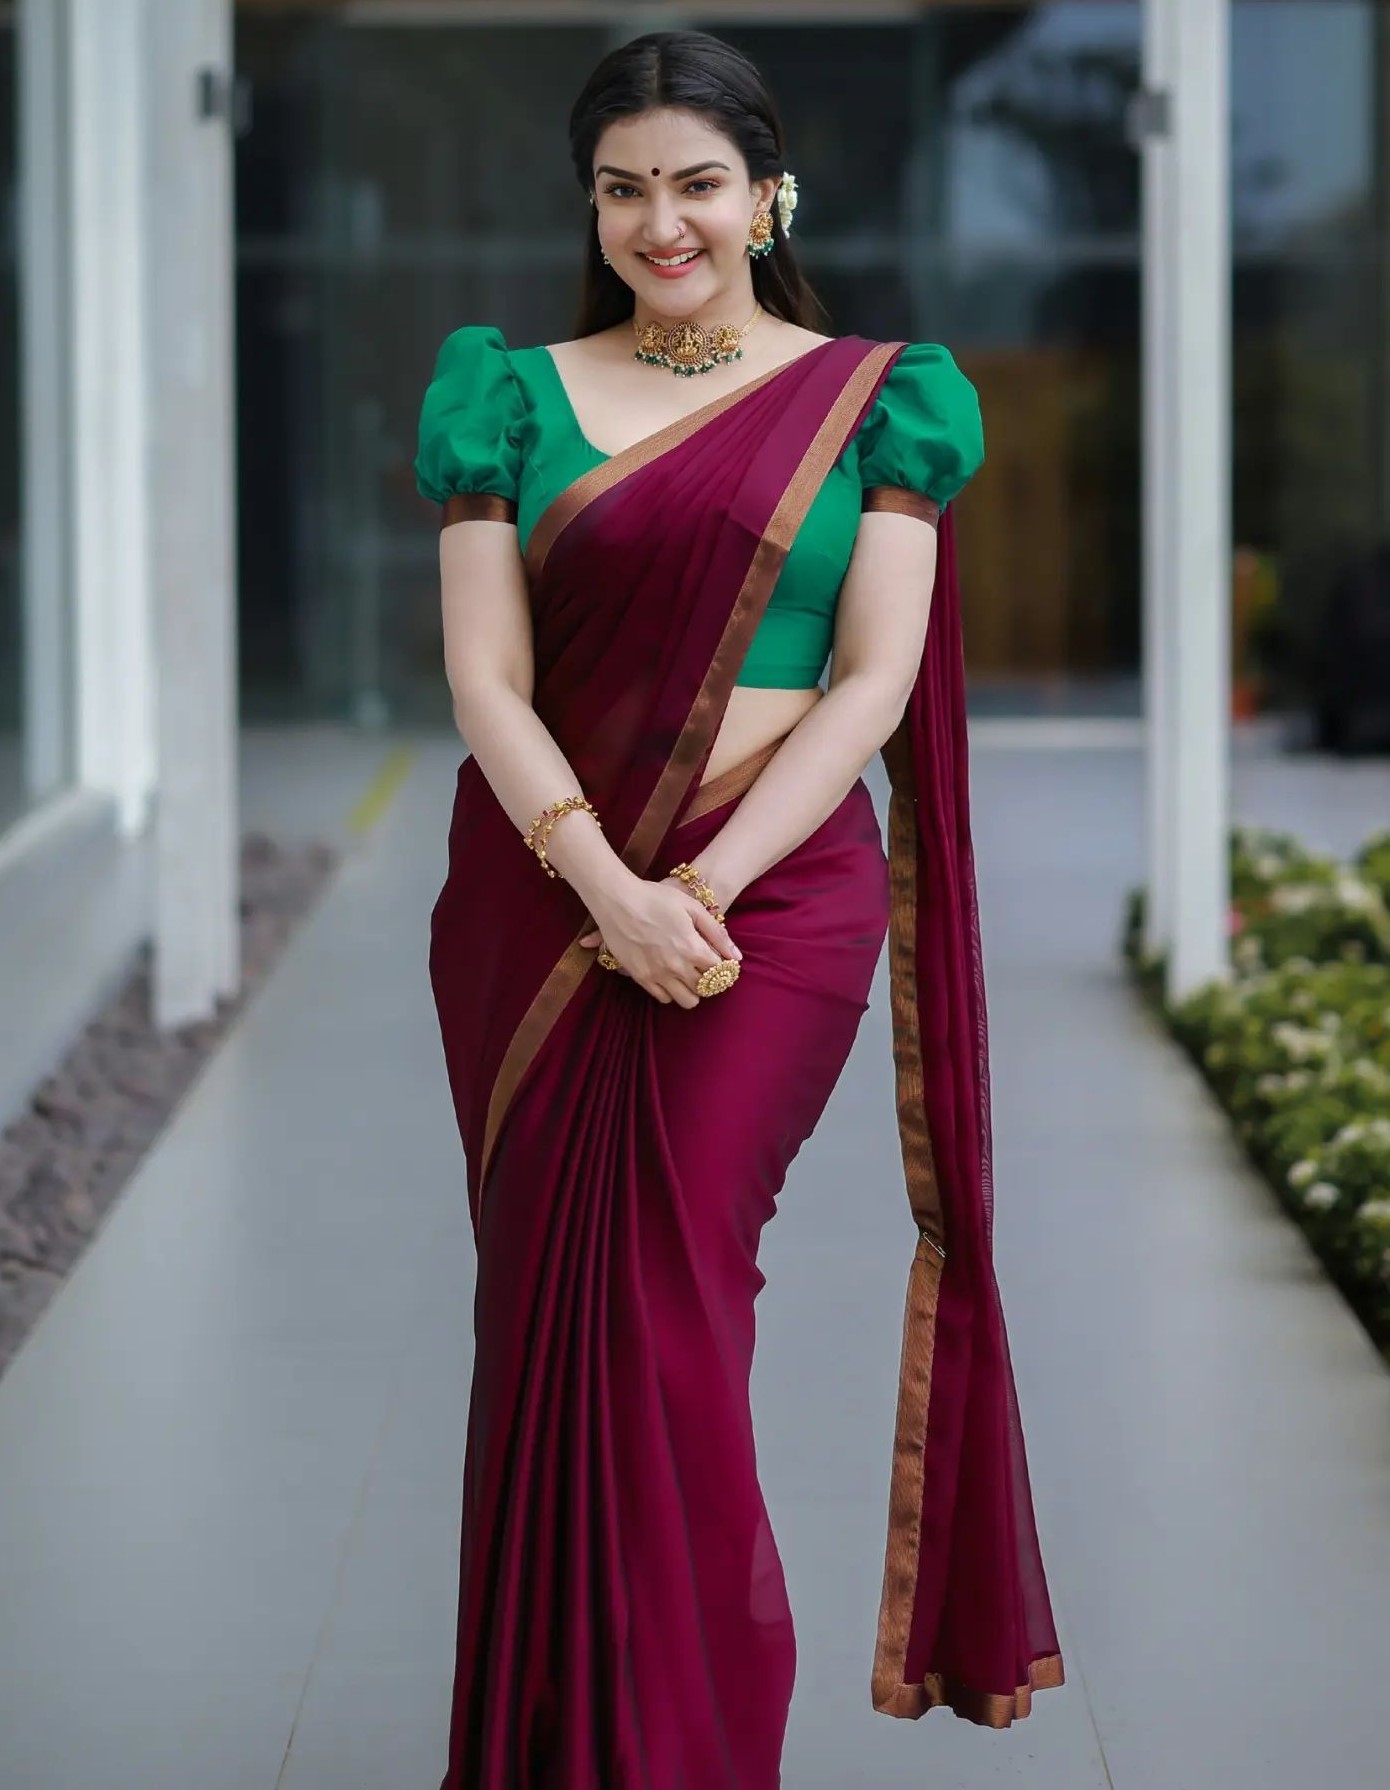 Honey Rose In Wine Silk Saree With Golden Border Paired With Green Puffed Half Sleeves Blouse Traditional Outfits & Looks